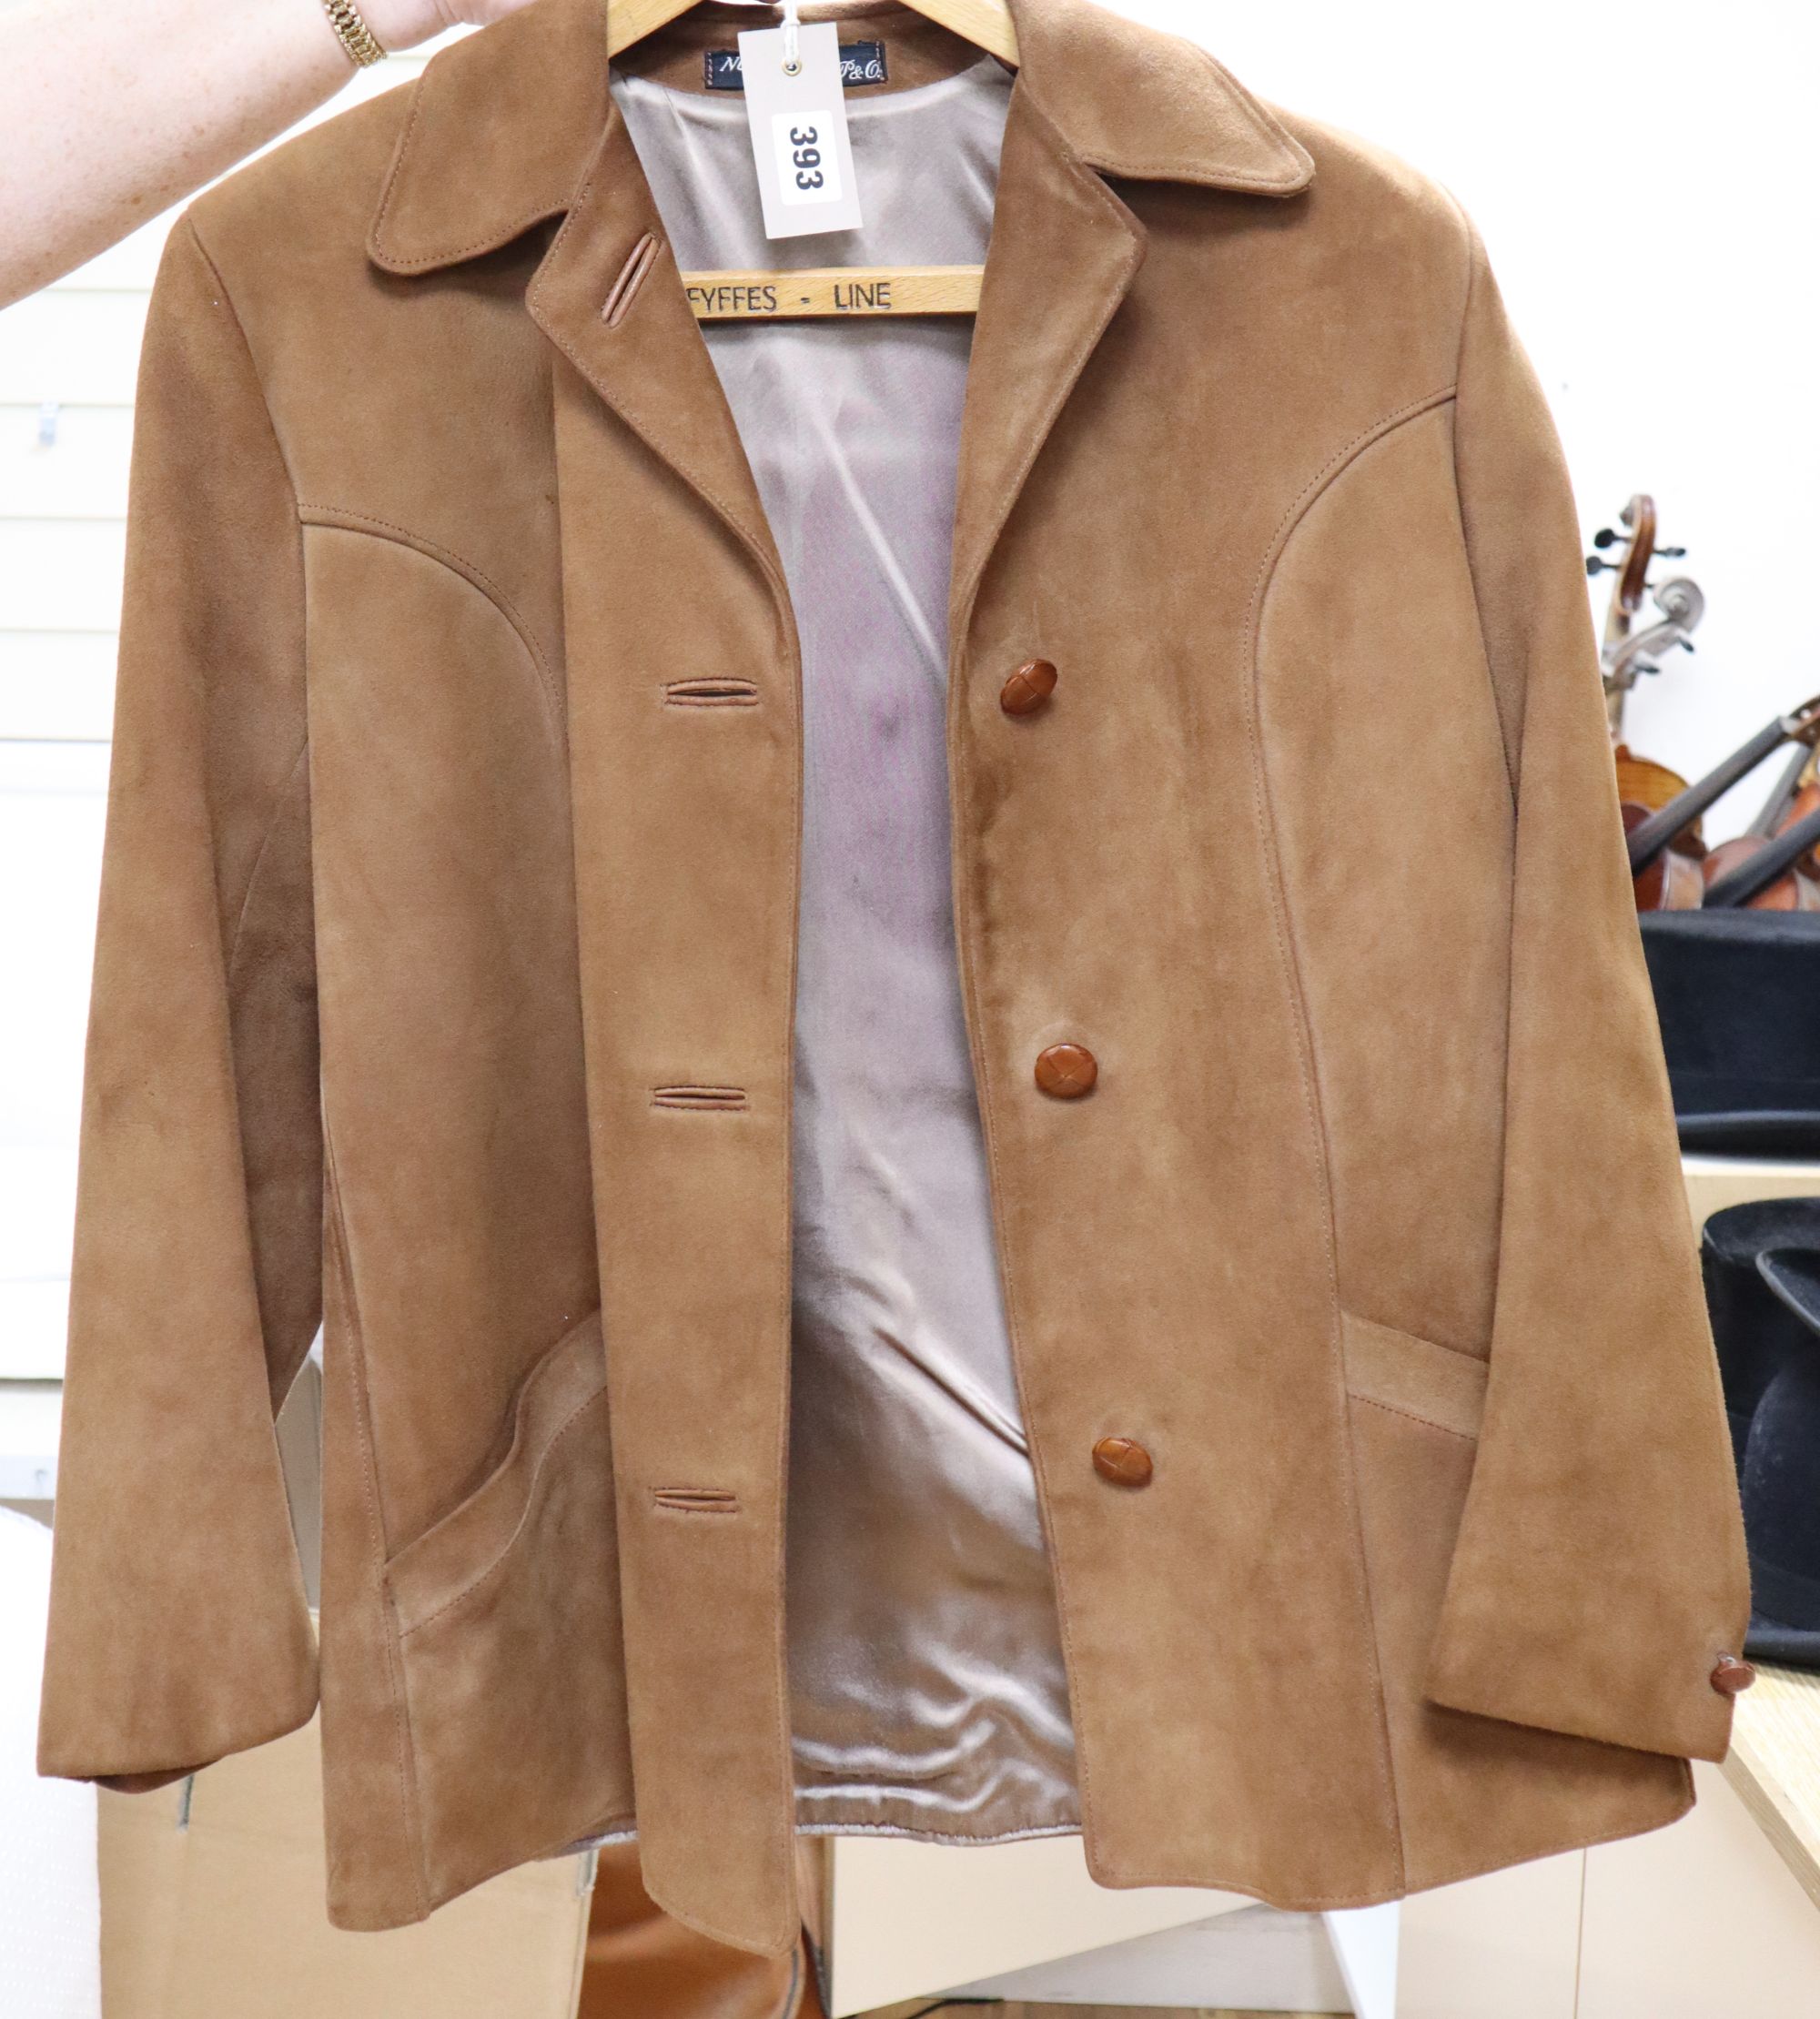 A light tan 1960s suede jacket and a similar chocolate brown jacket